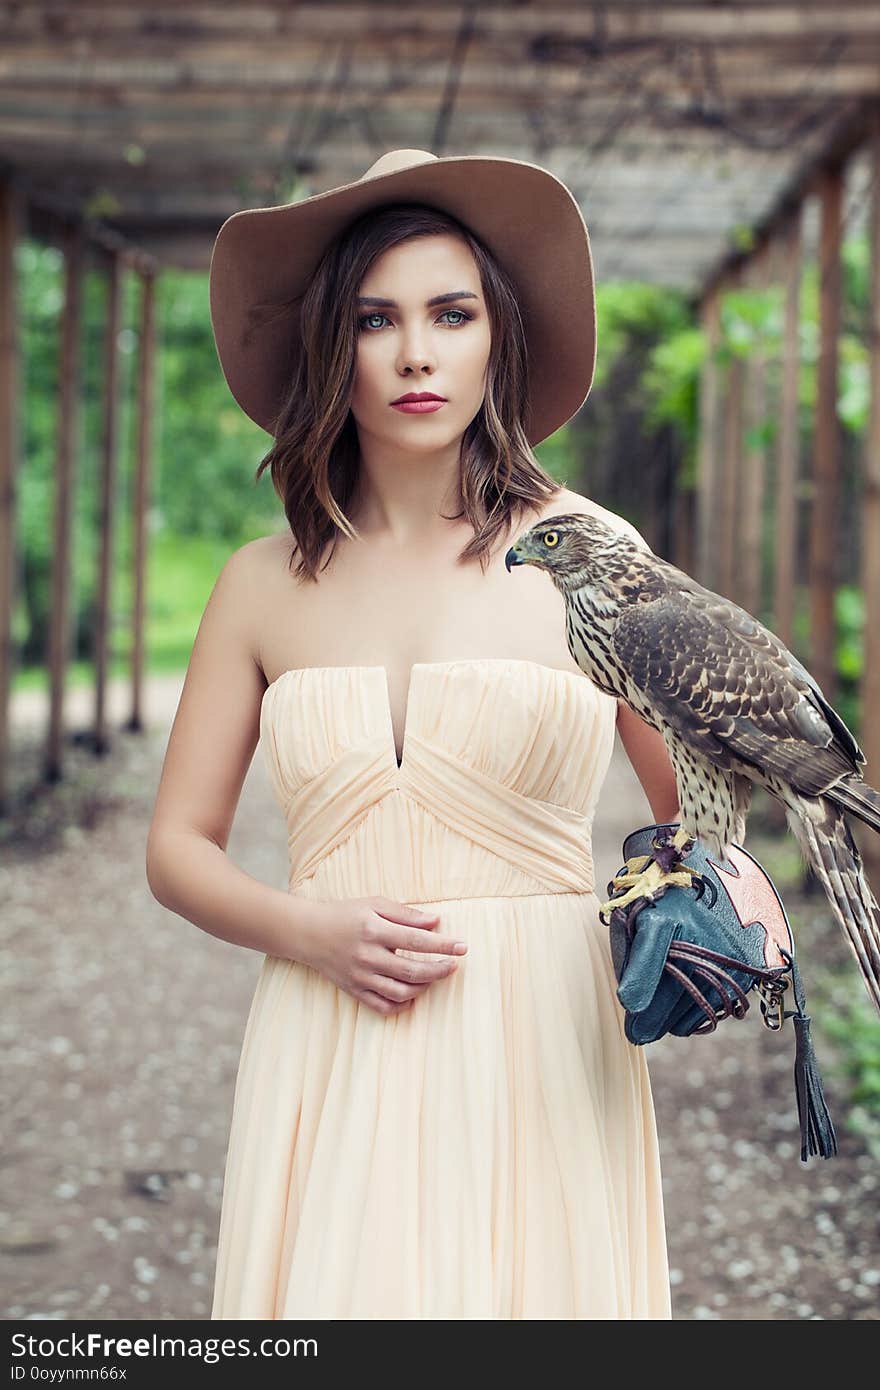 Sensual woman wearing peach color dress and brown hat with bird, outdoor fashion portrait.